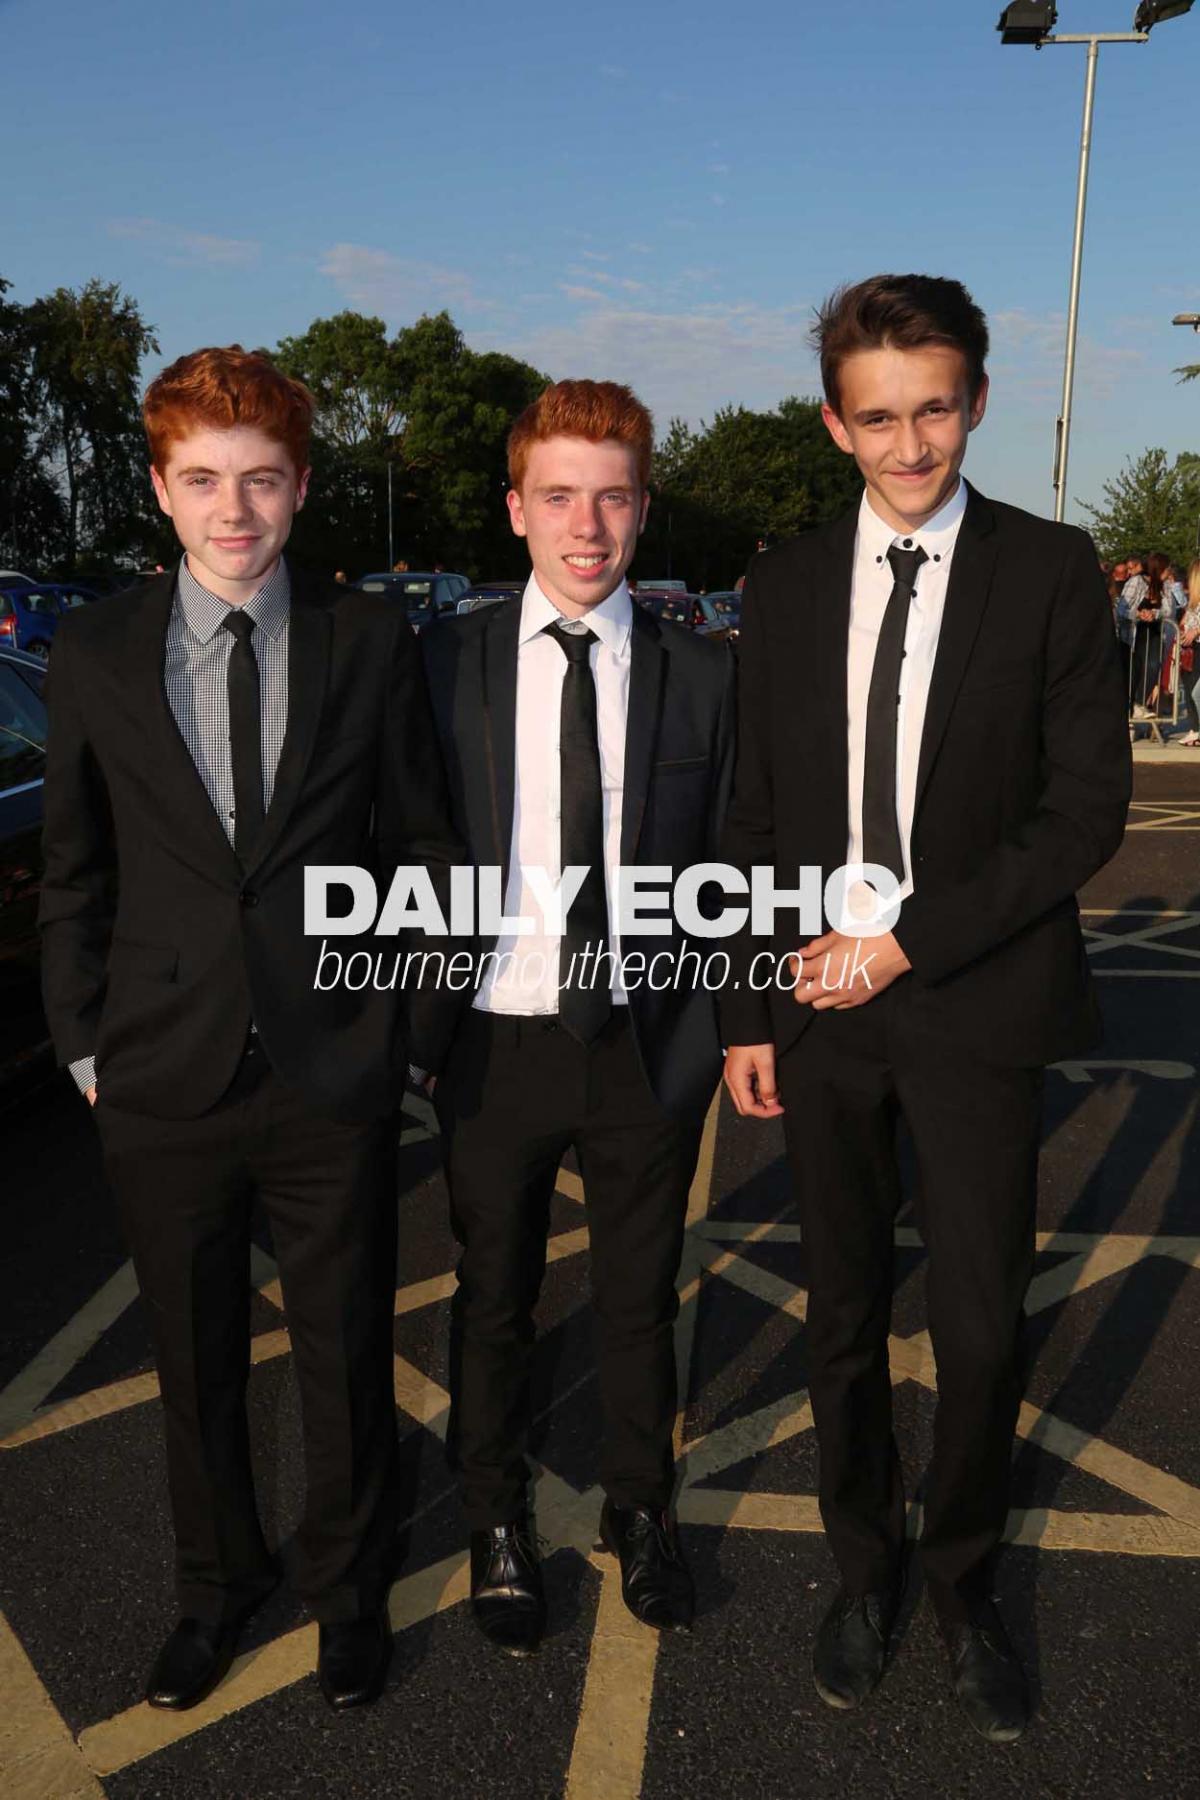 Queen Elizabeth School Year 11 prom  held  at the school on the 1st July 2014